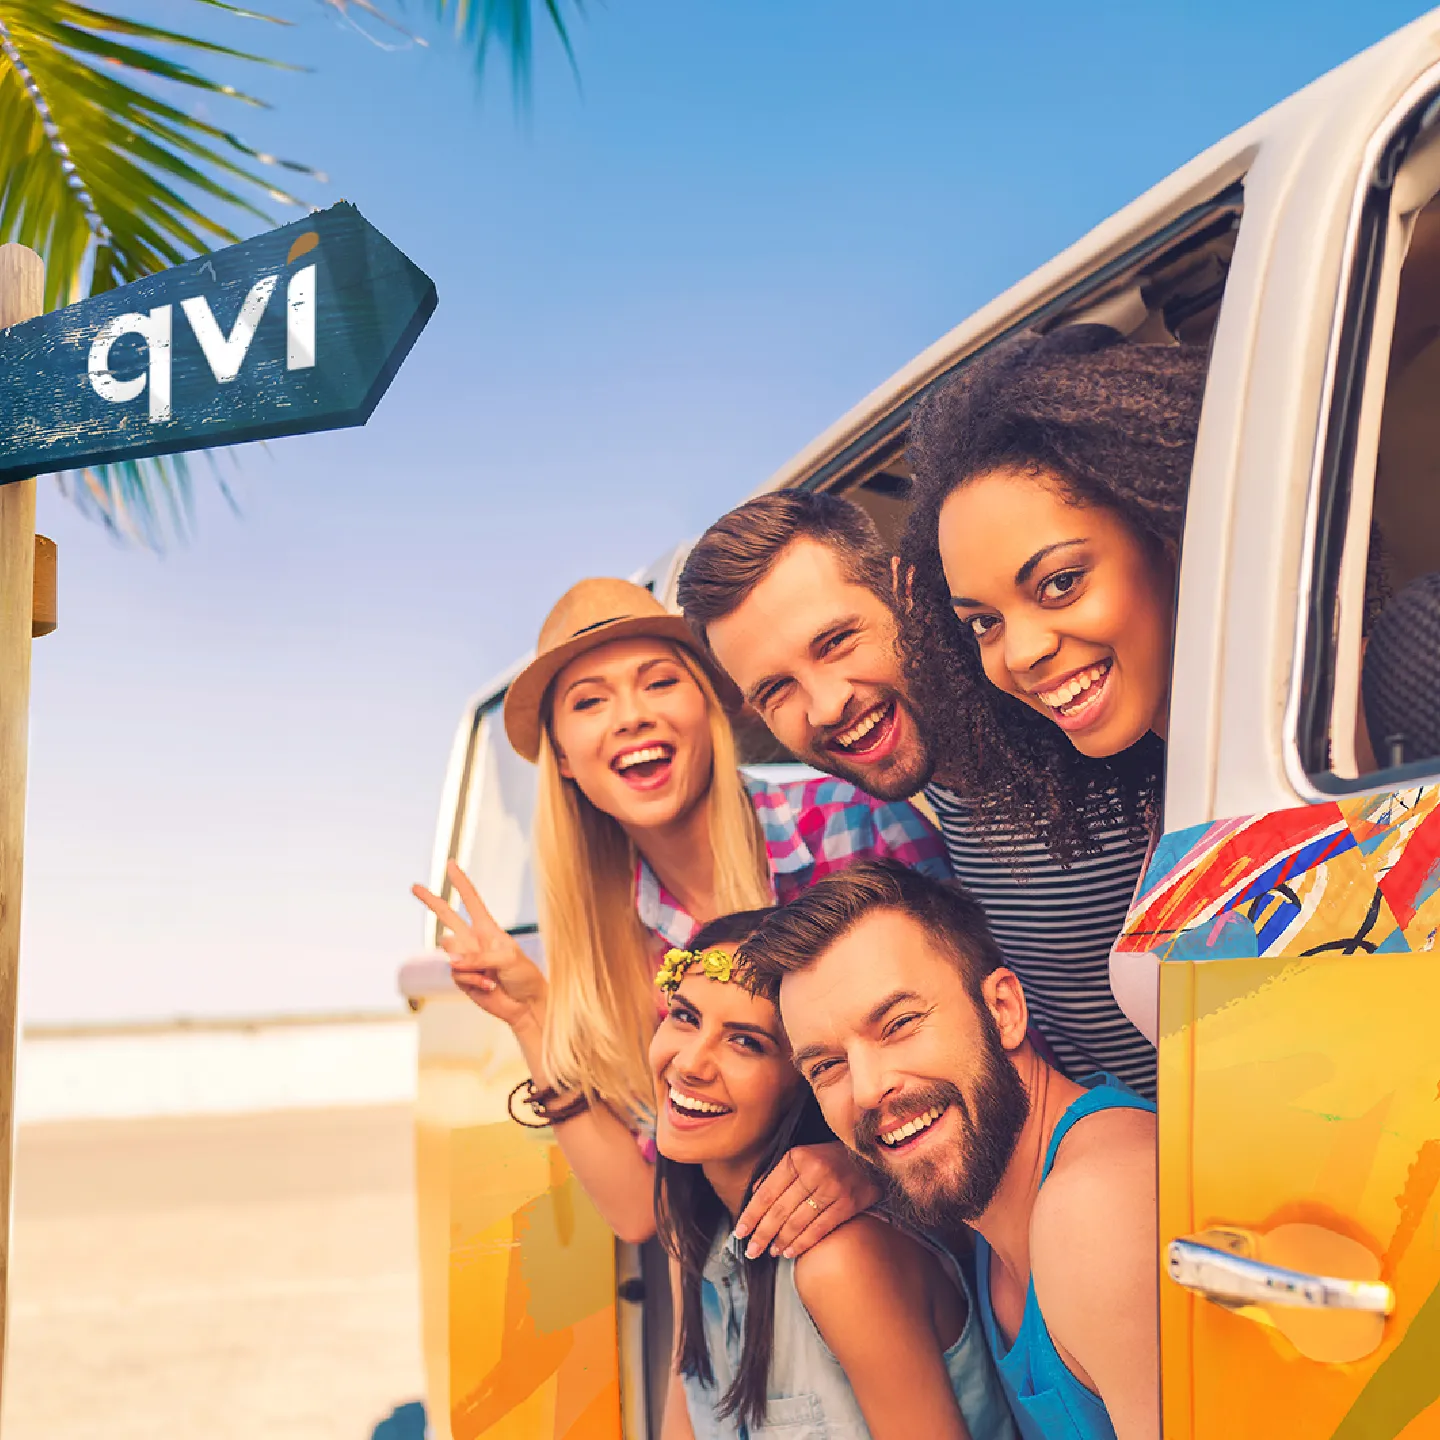 Friends in a van enjoying their holiday booked through QVI